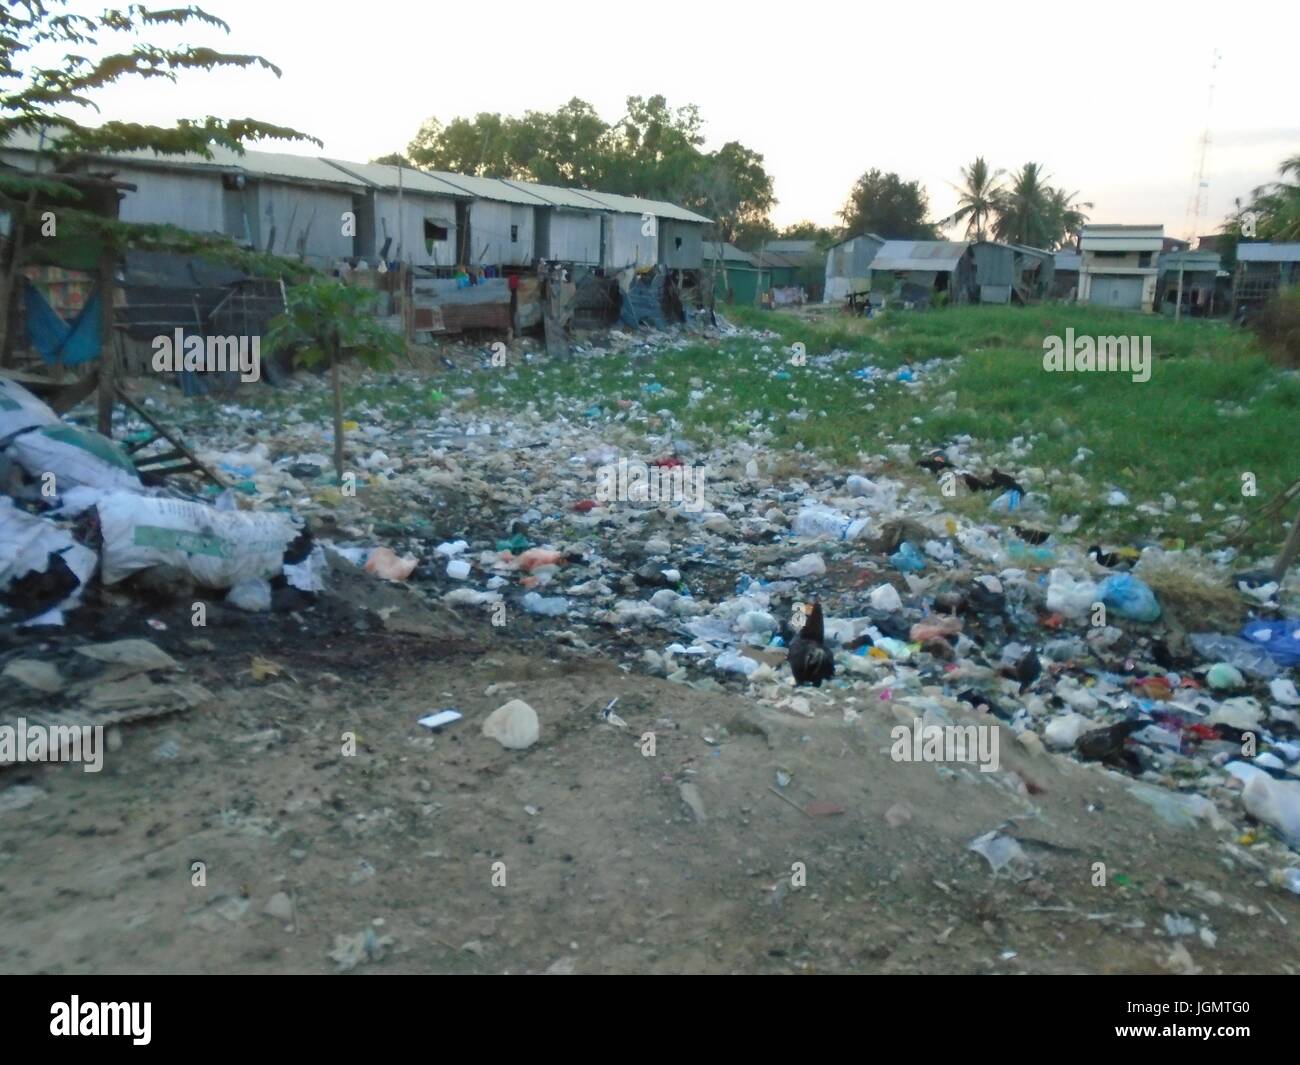 Trash Dump Garbage Poipet Cambodia Banteay Meanchey Province Stock Photo